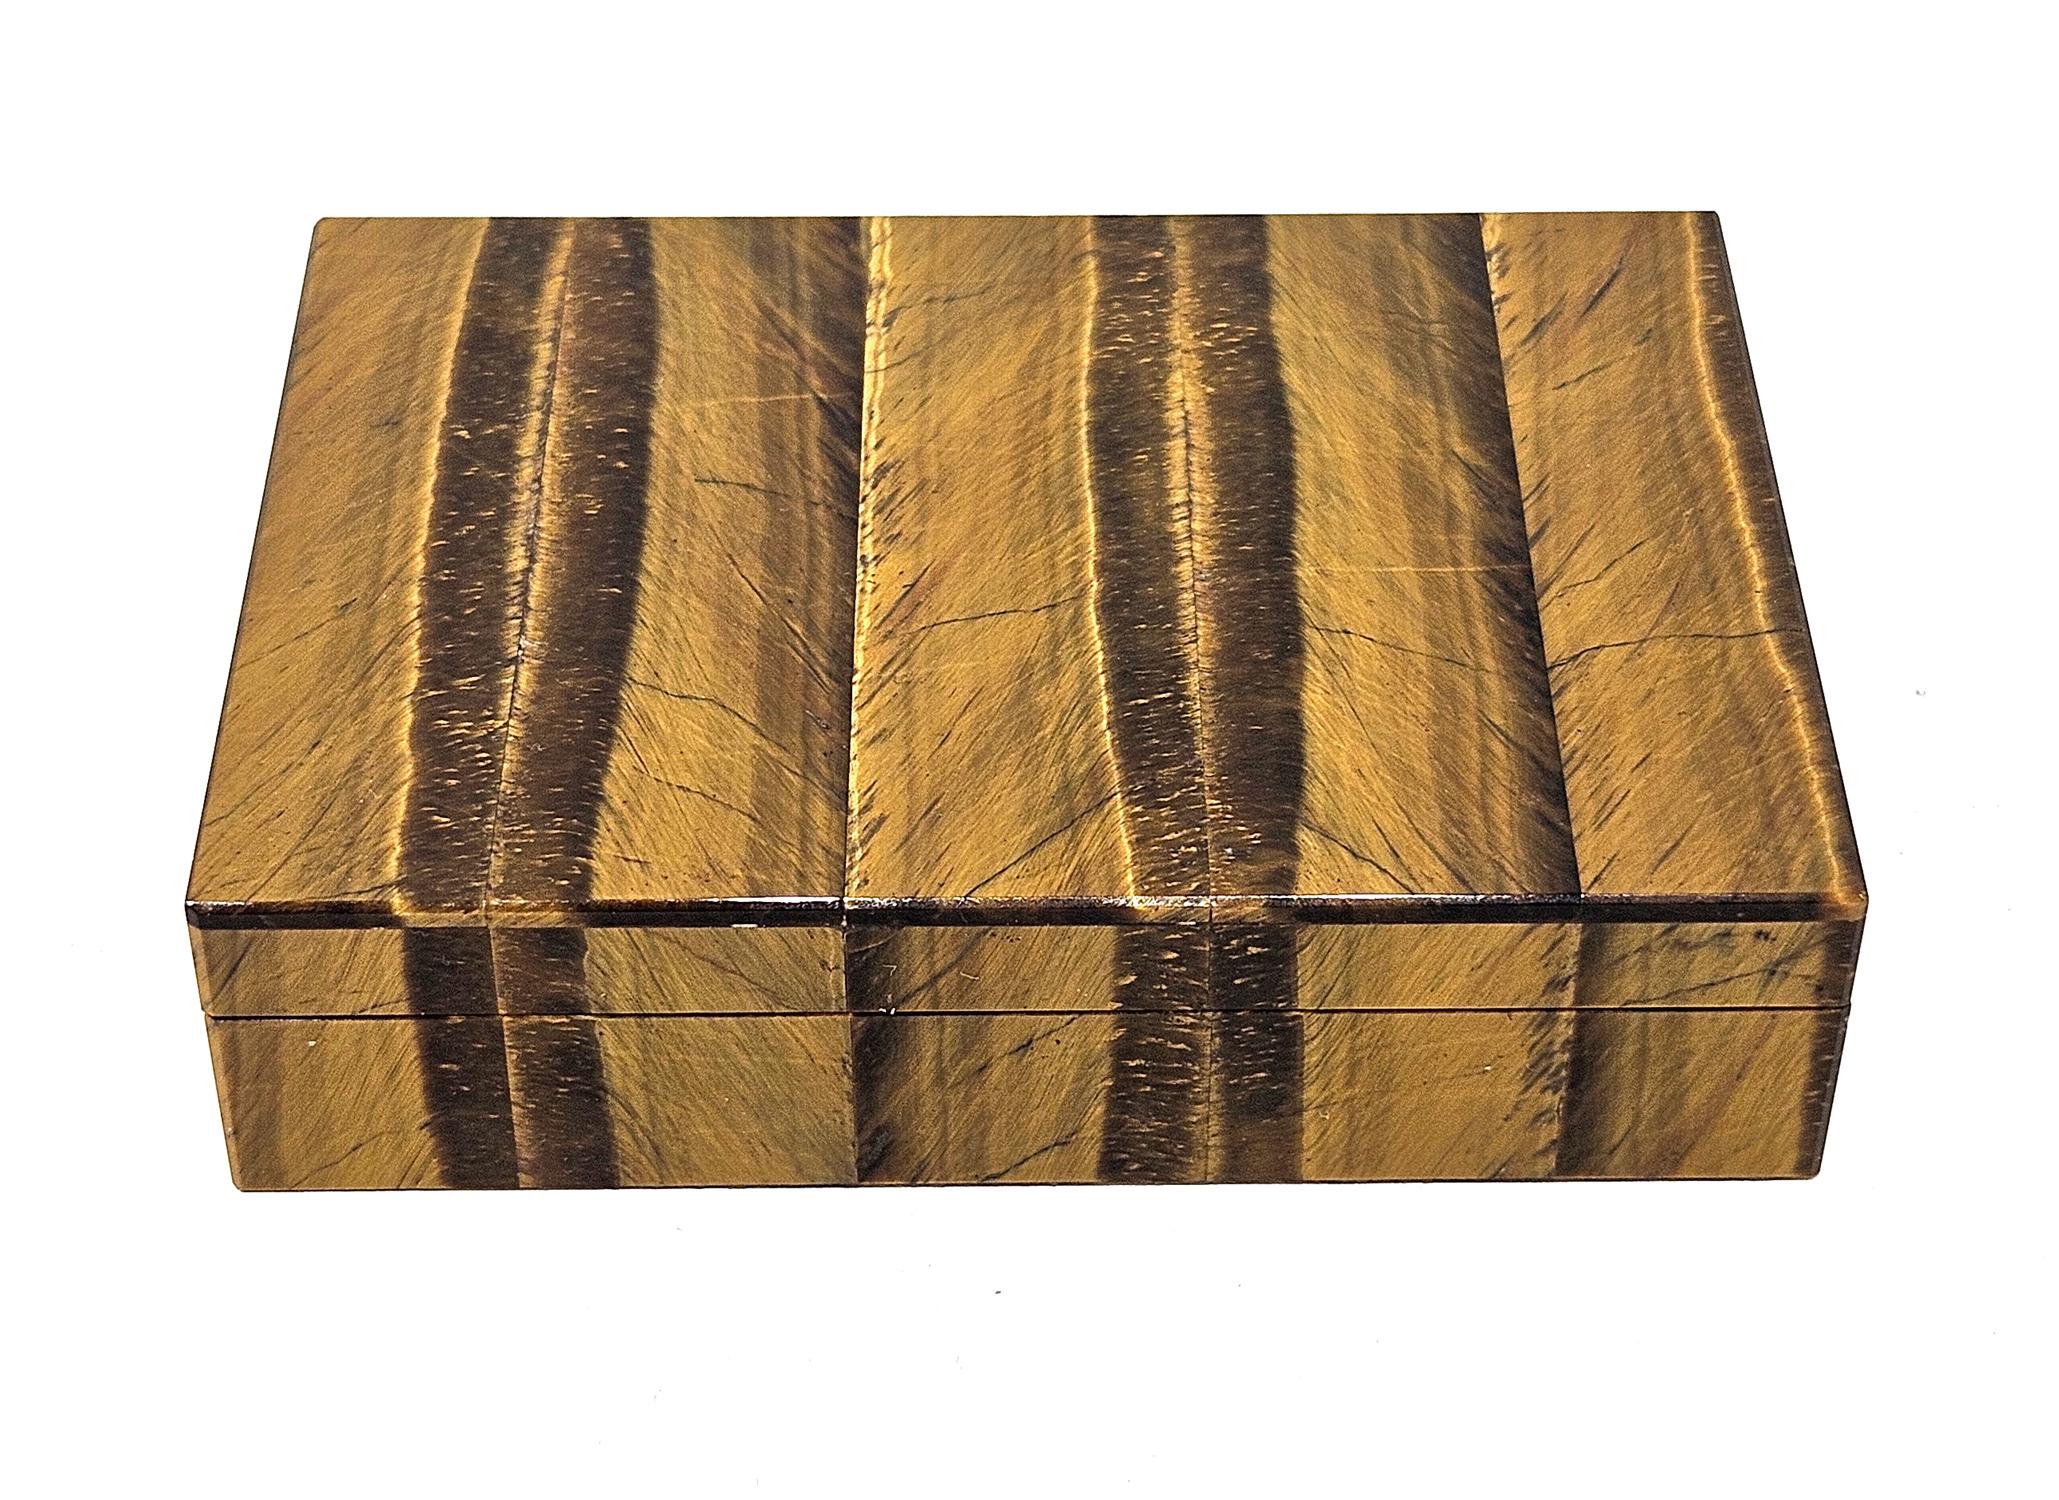 An exquisite vintage Italian tiger’s eye intarsia box stamped by Gori & Zucchi (later to become Unoaerre), retailed in Ravenna in c. 1960s. 
The box is veneered in finely banded tiger’s eye quartz with a beautiful pattern and lustre that glistens as